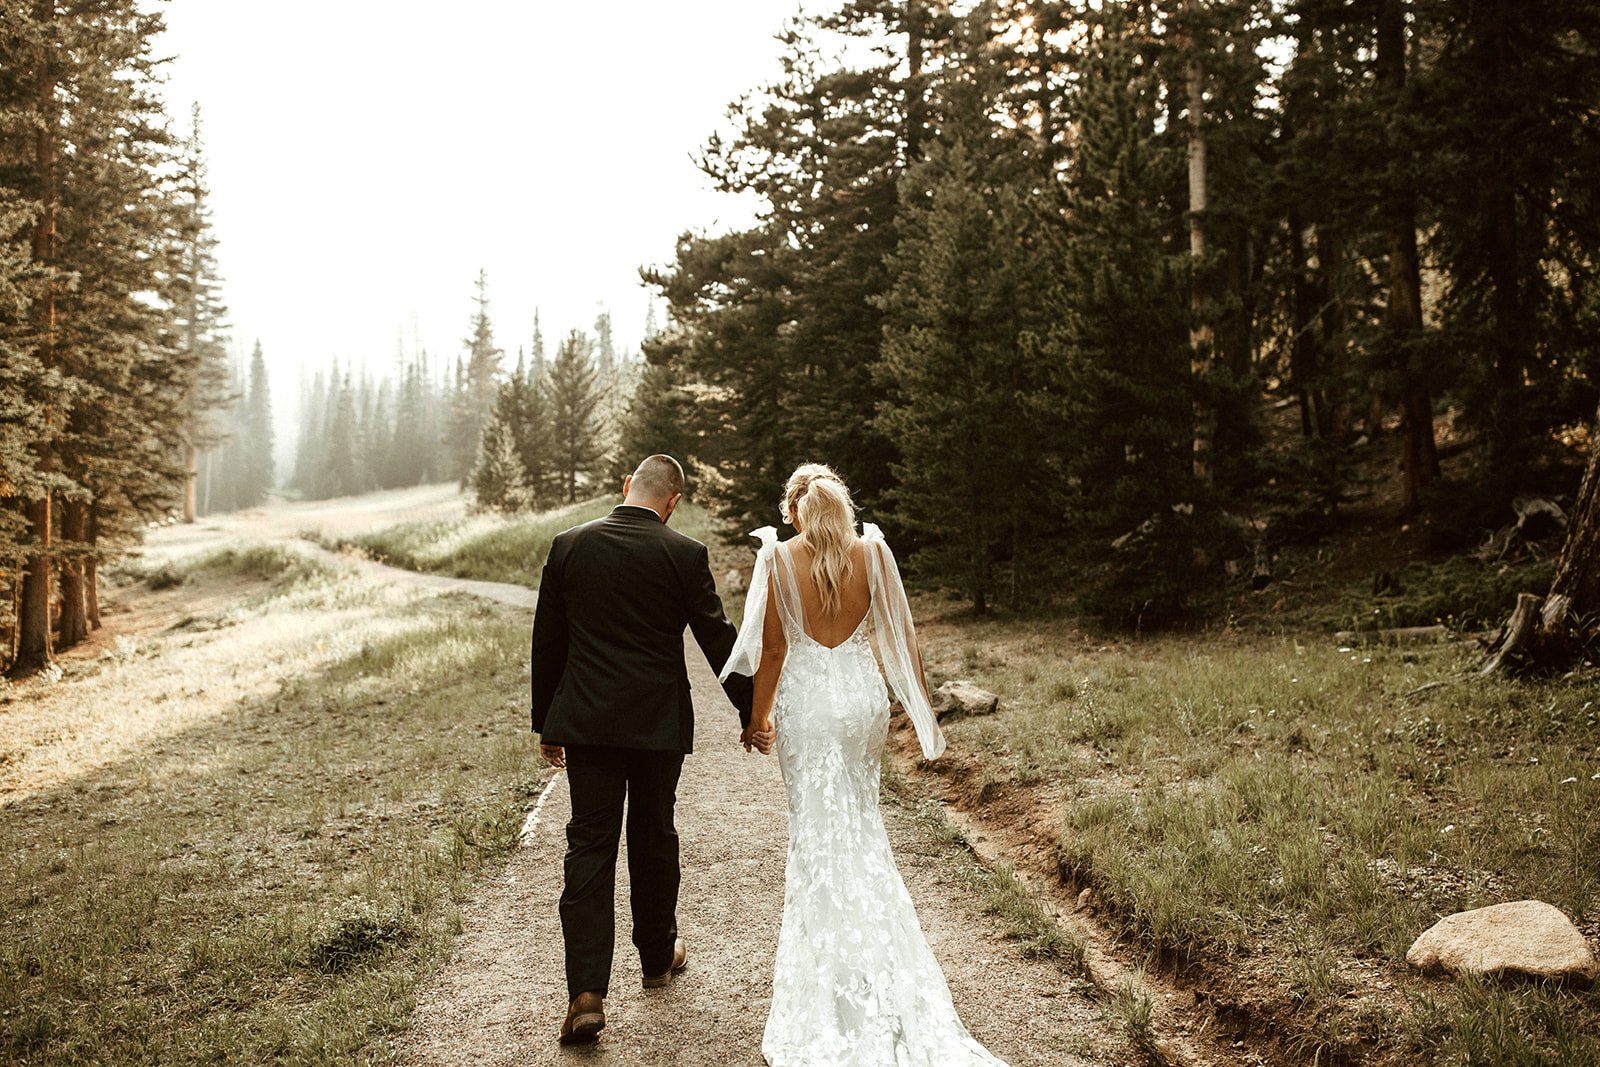 Made-With-Love-Elsie-Wedding-Dress-Rocky-Mountains-04.jpg